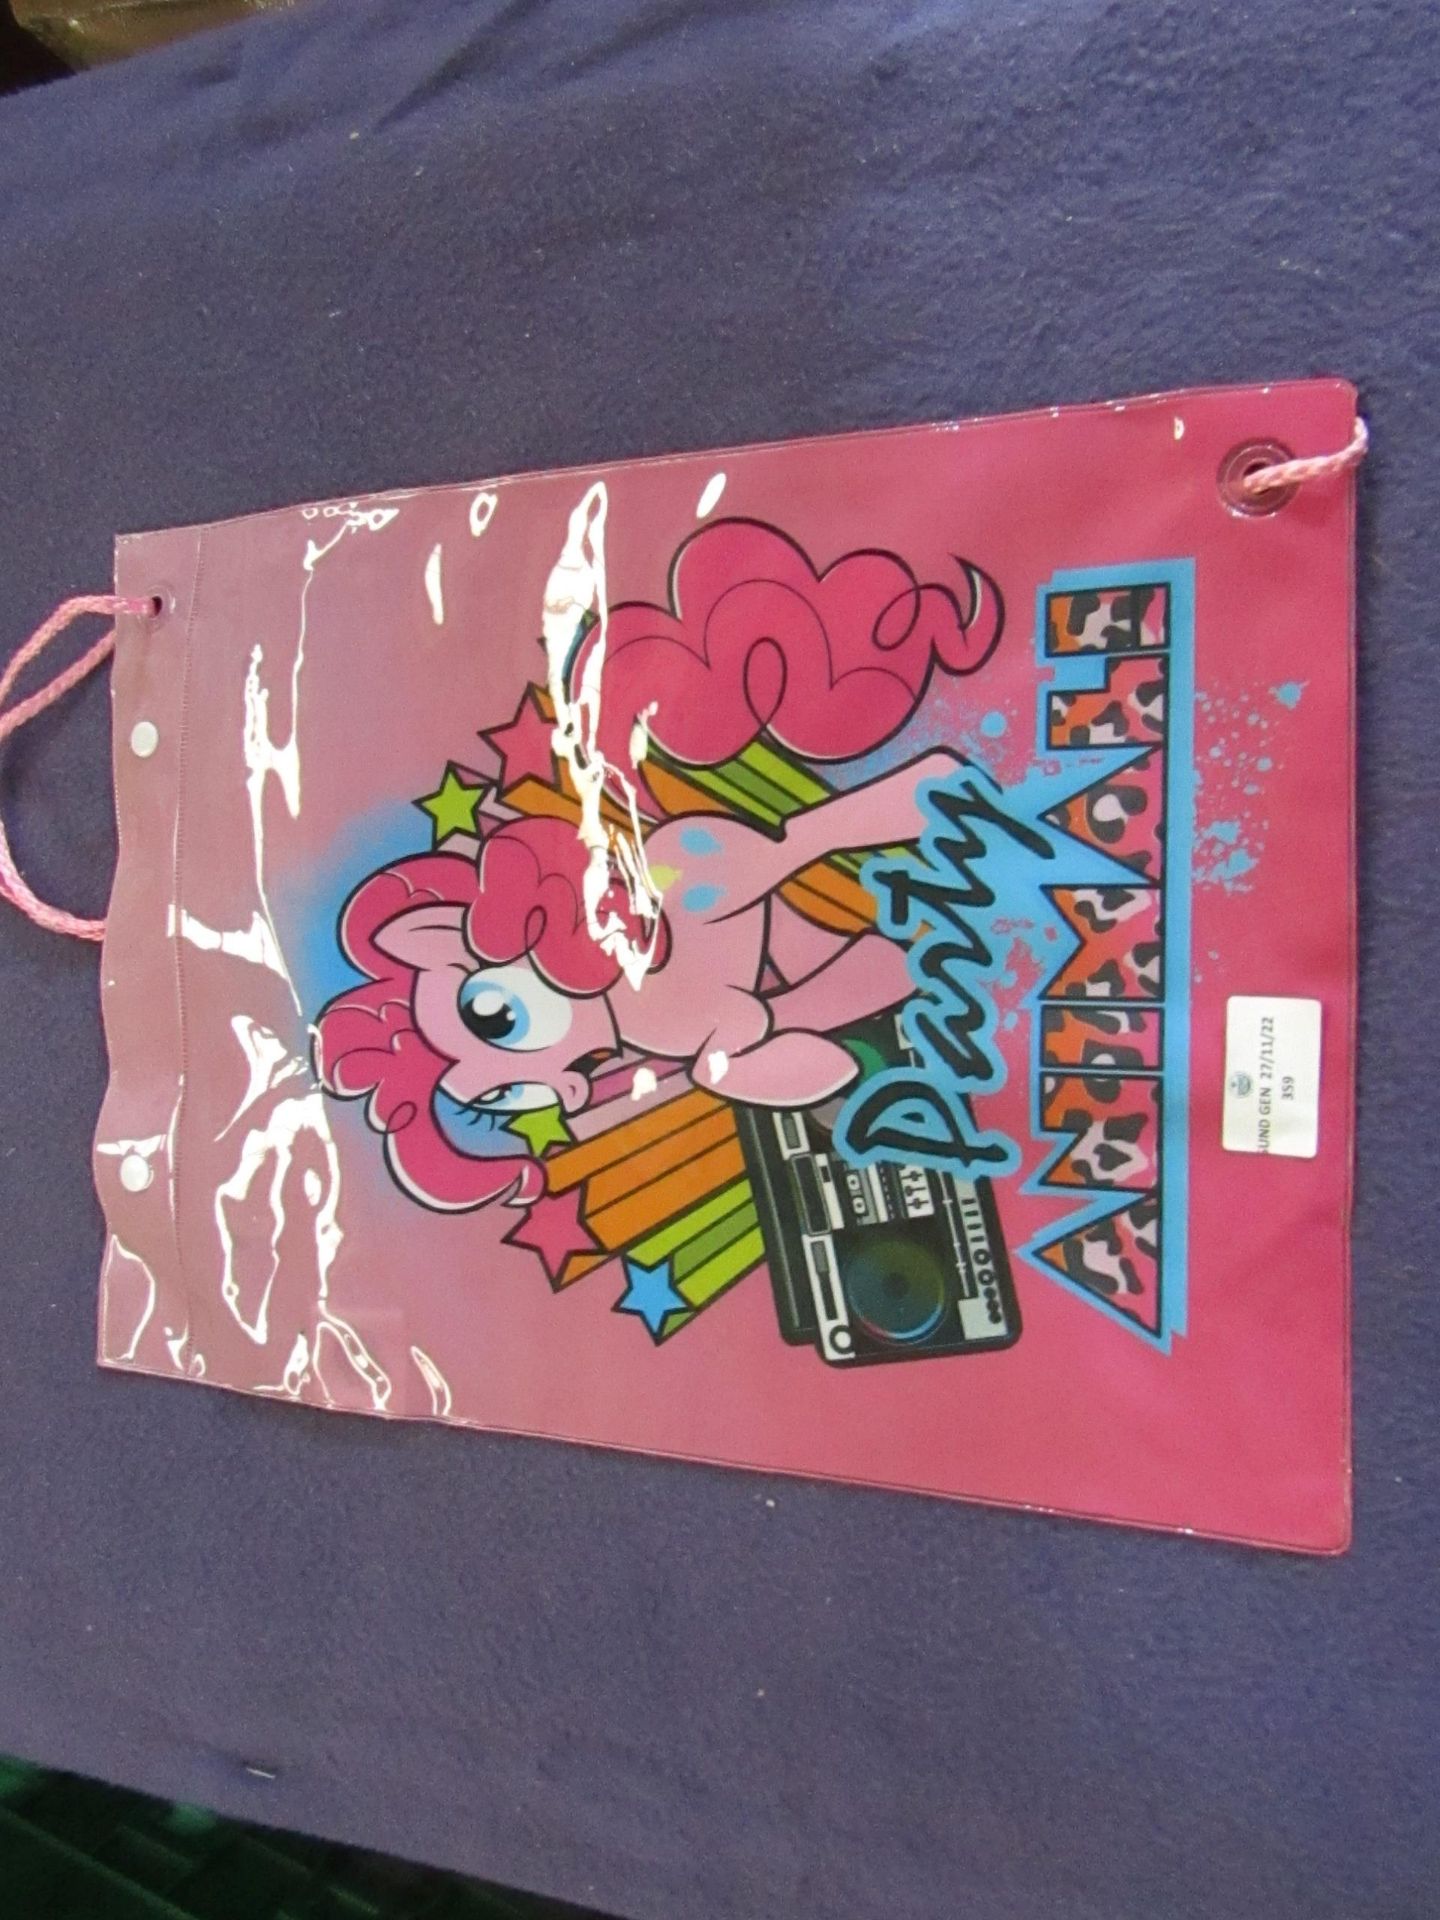 3x My Little Pony - Backpacks - No Packaging, Original Tags.